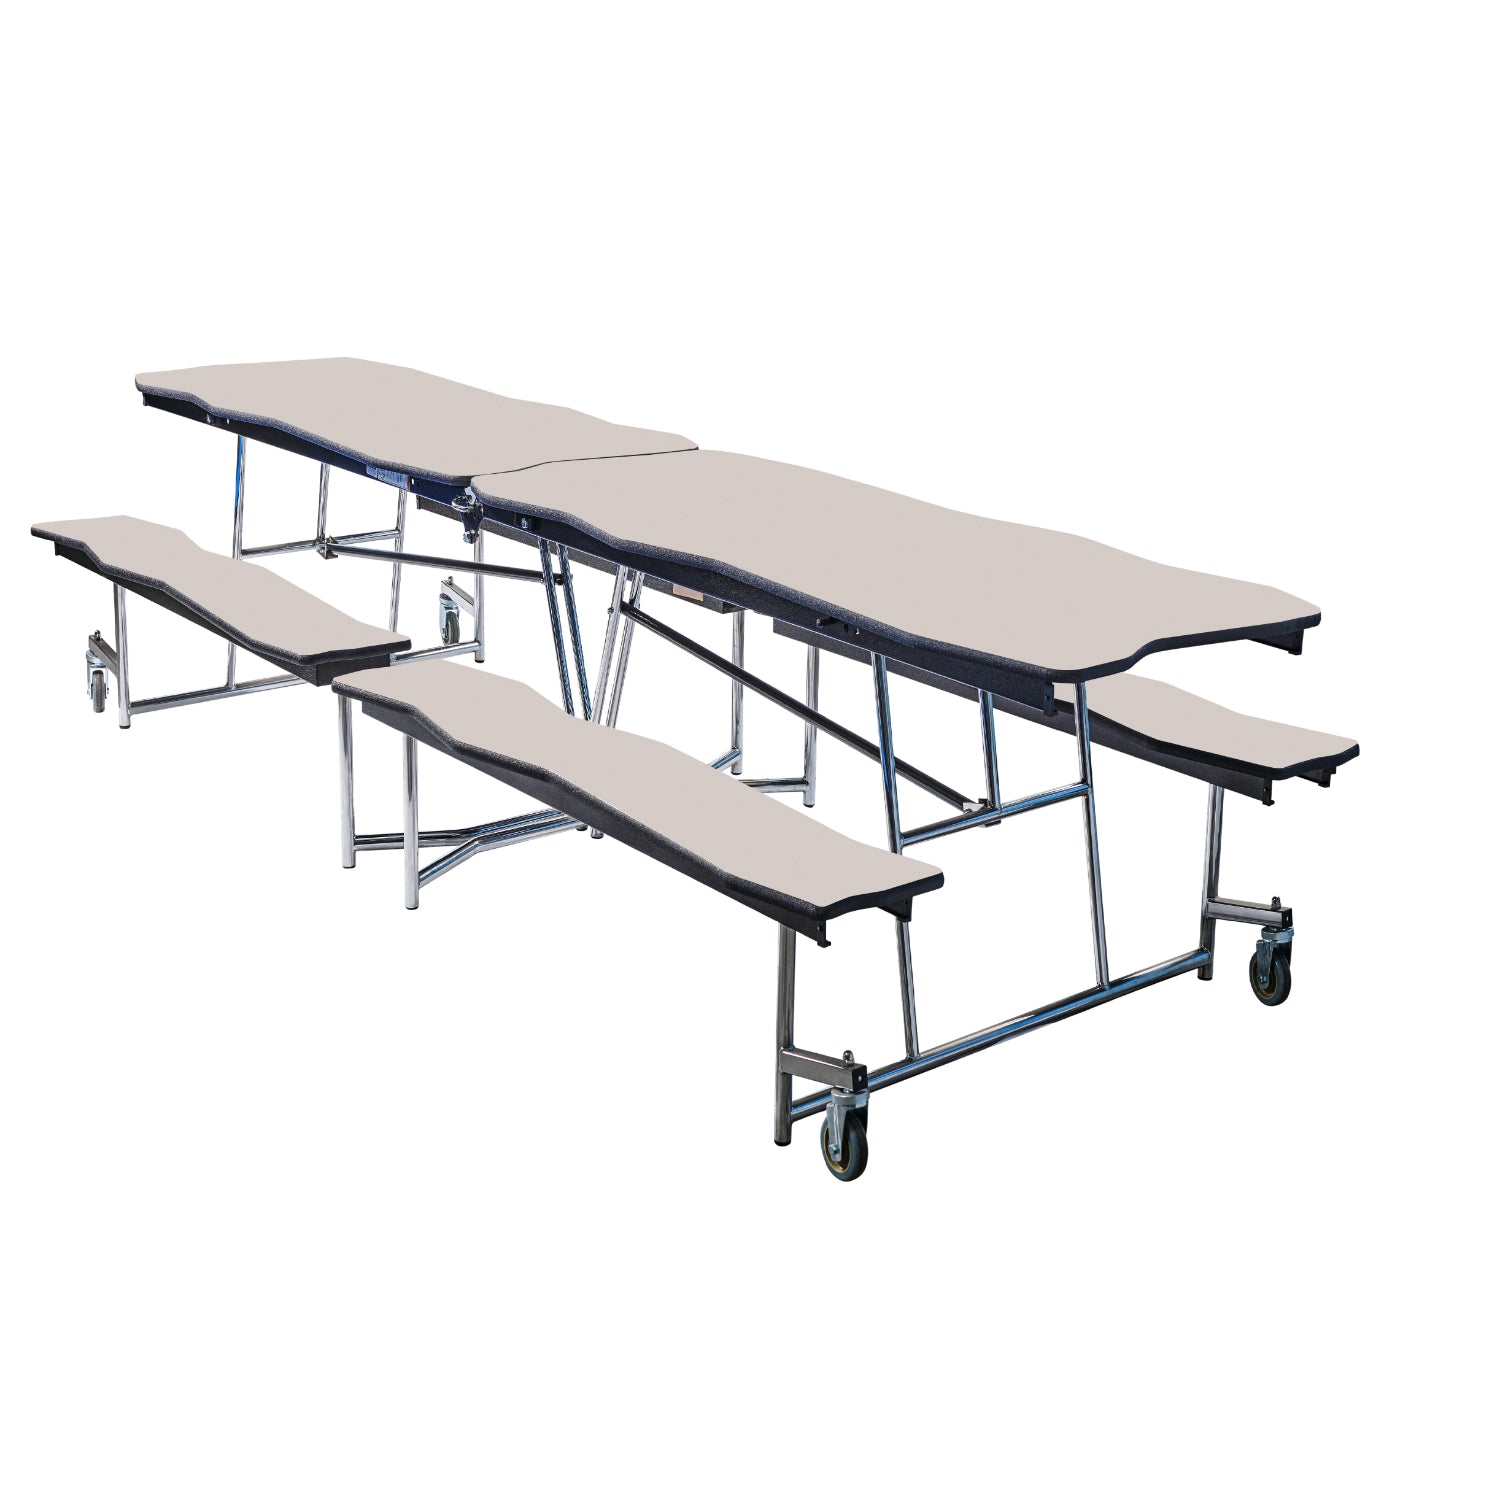 Mobile Cafeteria Table with Benches, 8' Bedrock, MDF Core, Black ProtectEdge, Chrome Frame